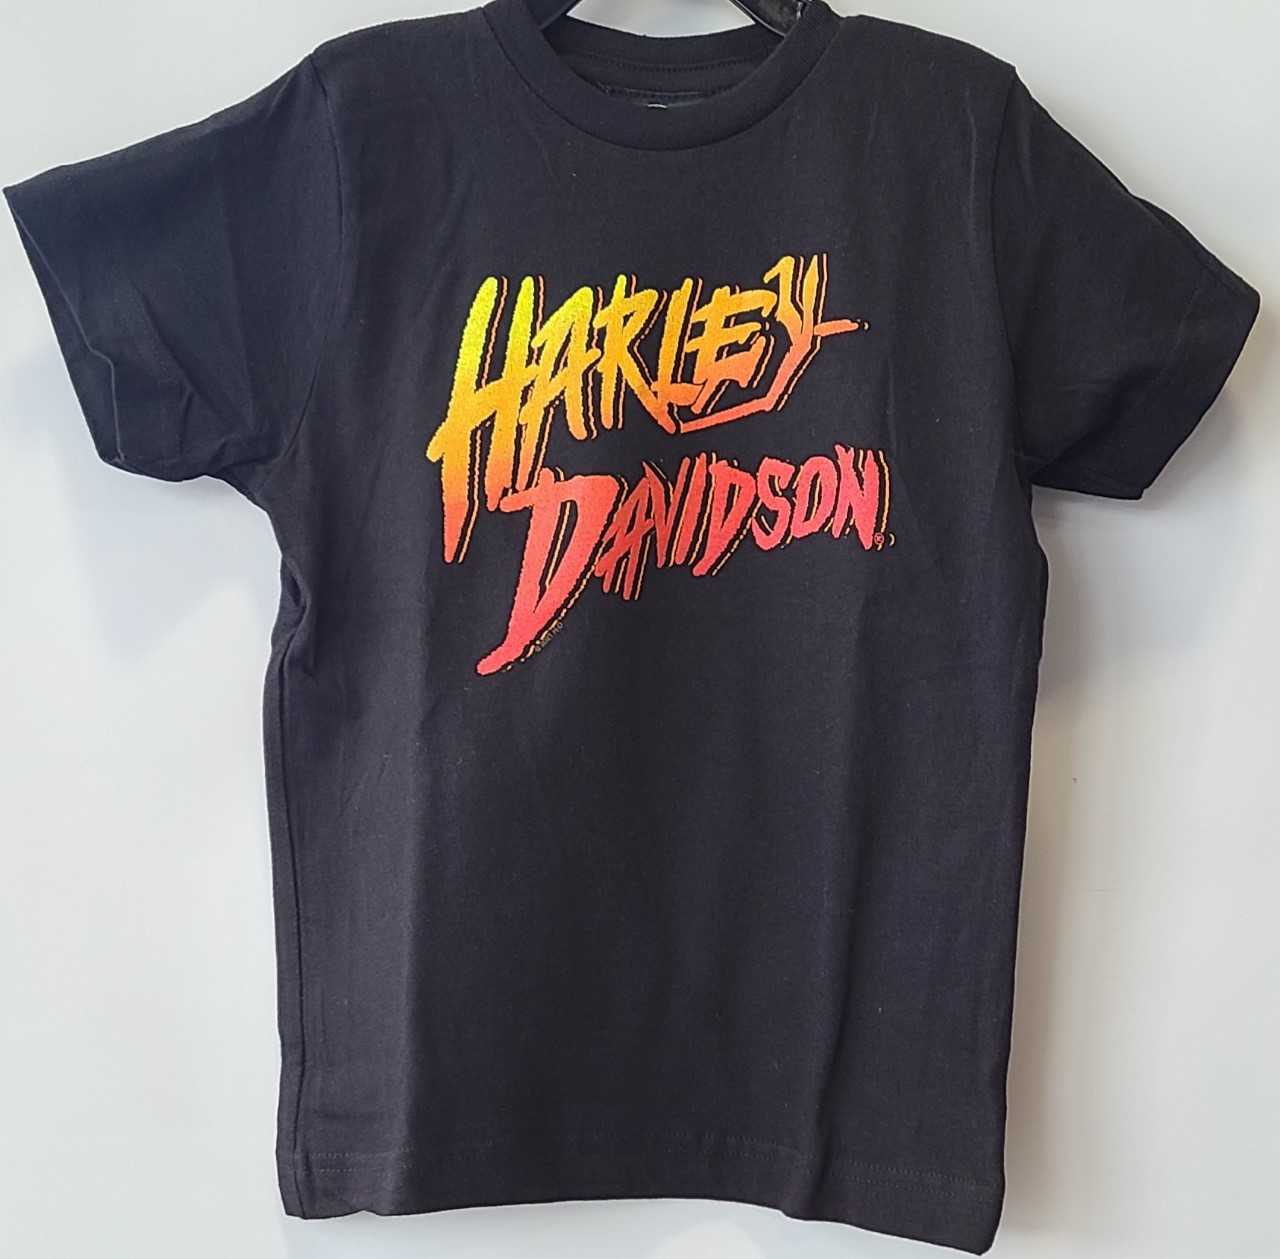 HARLEY DAVIDSON FIRE TEXT S/S TDDLR